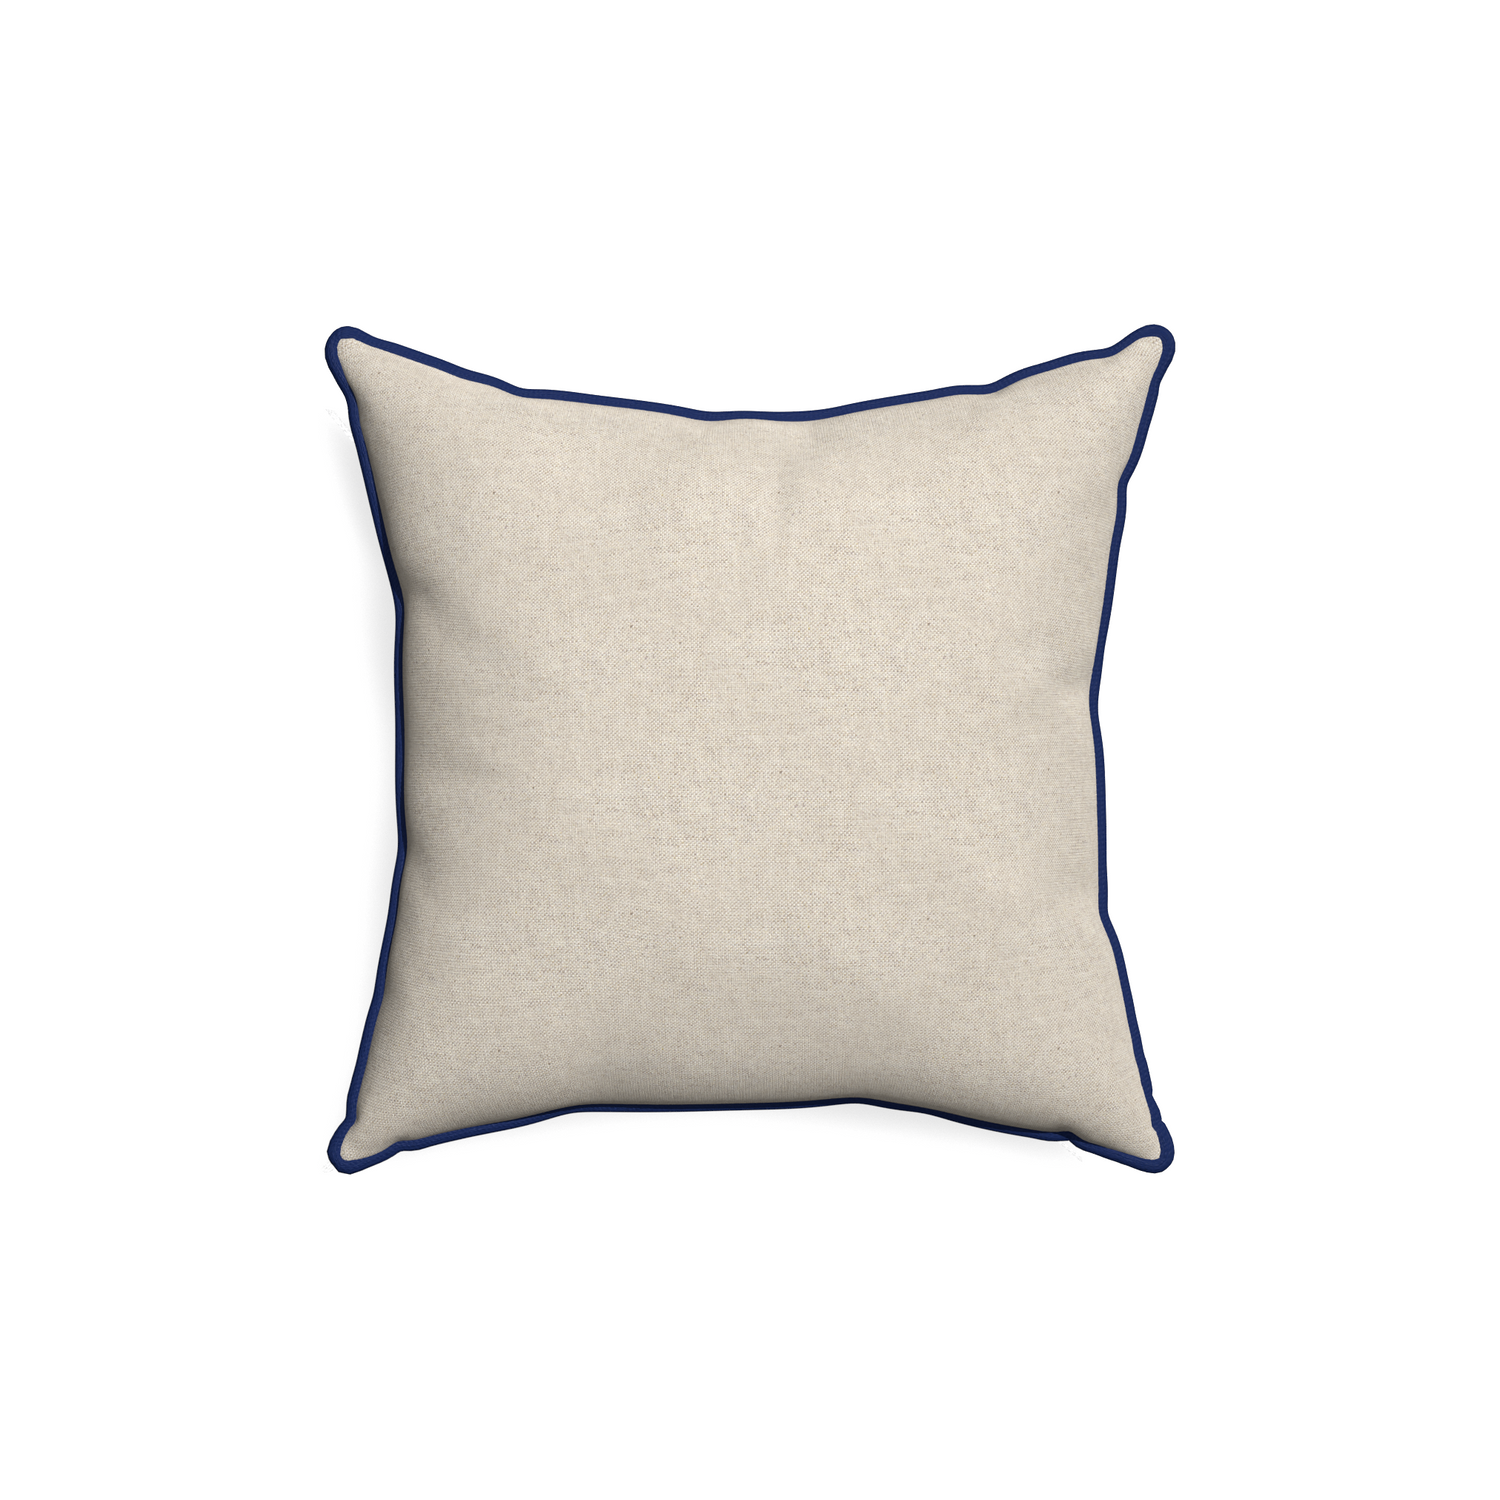 18-square oat custom pillow with midnight piping on white background